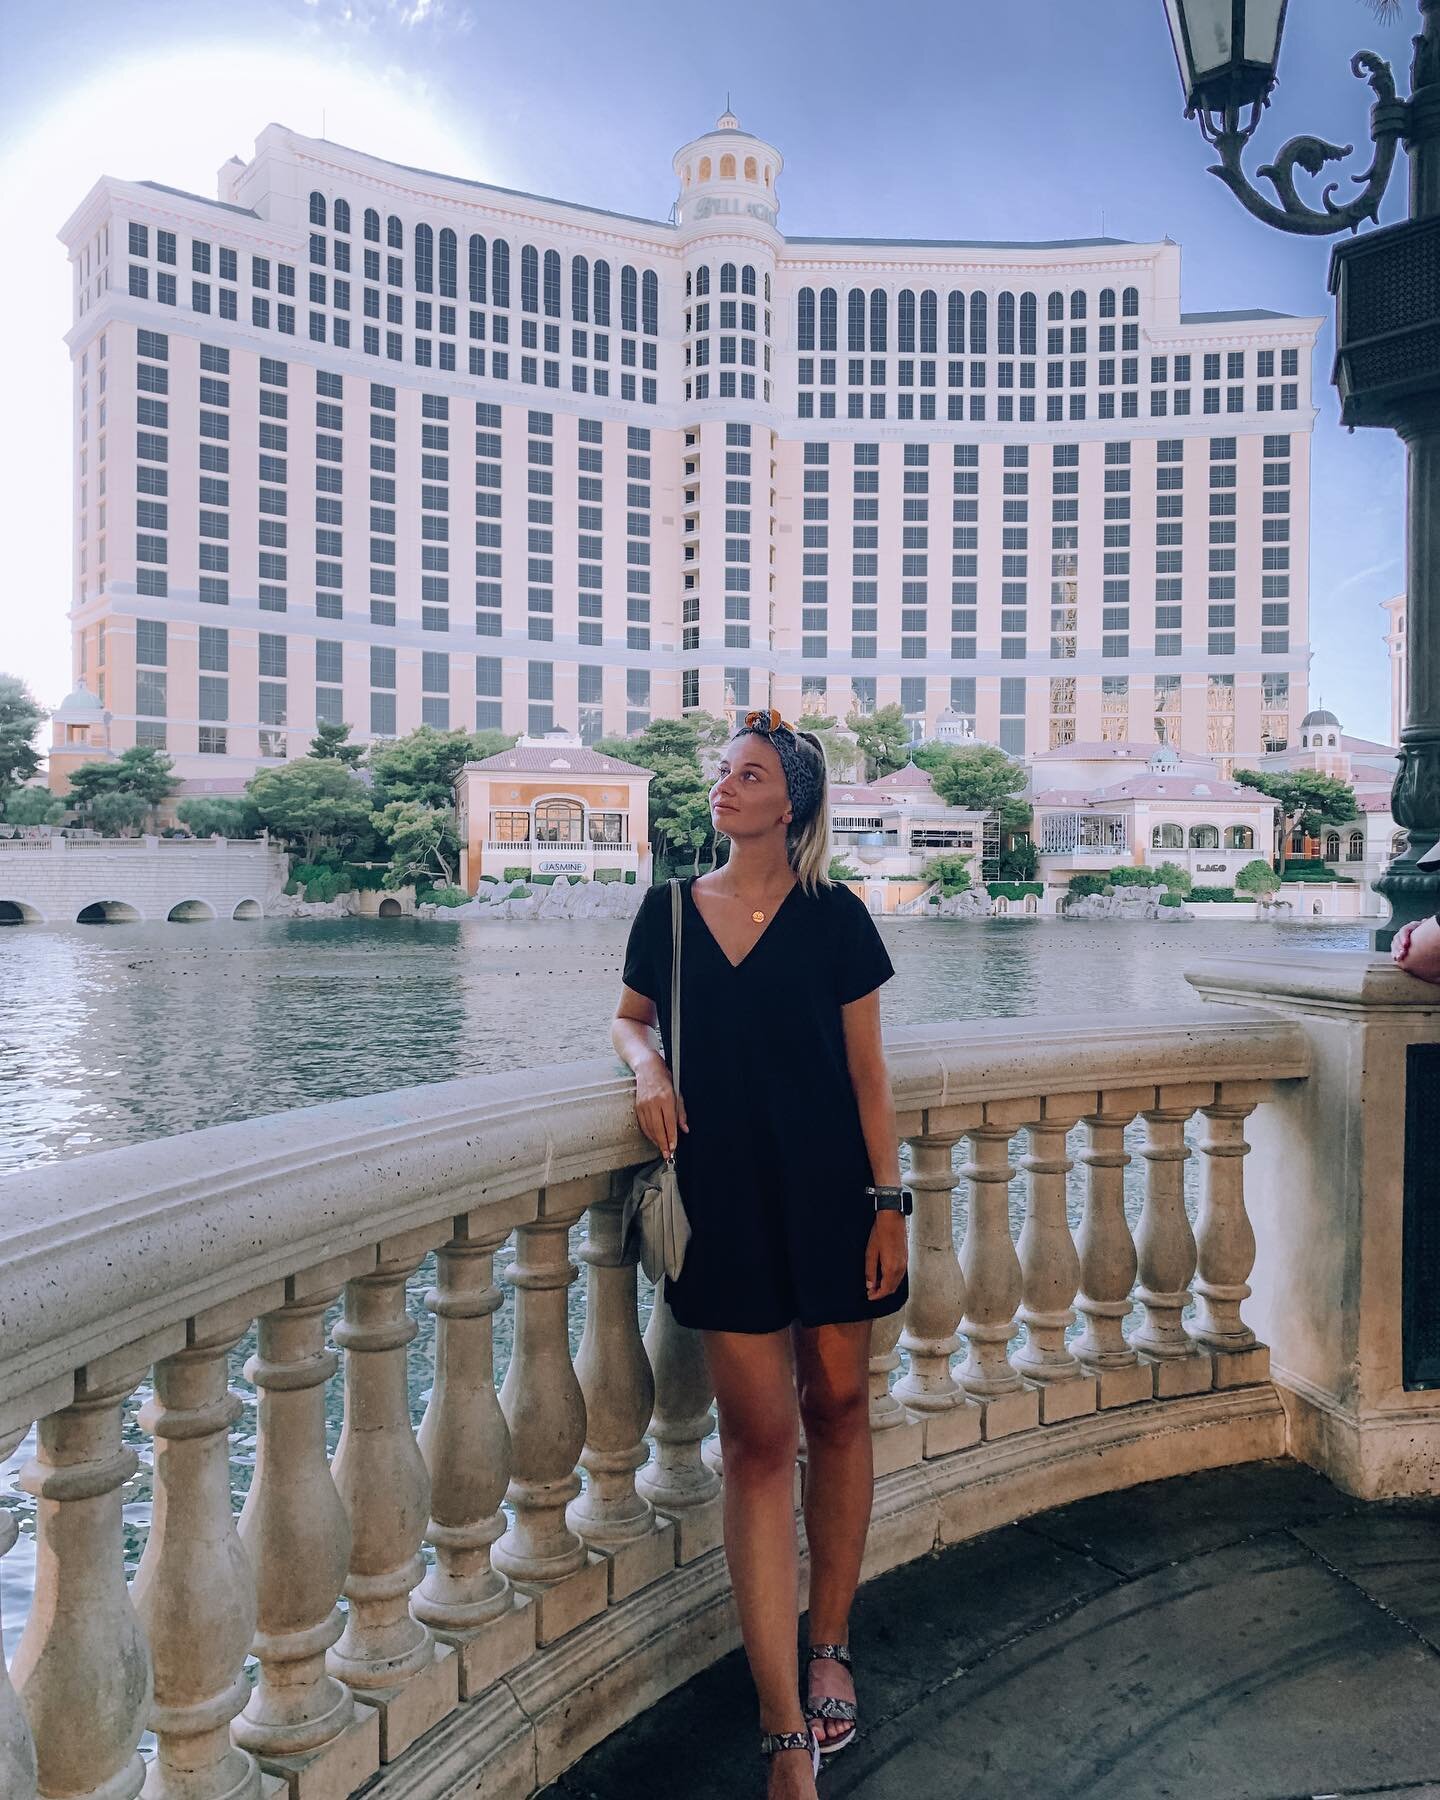 Las Vegas is everything you can imagine - and so much more! 🤪⠀
⠀
As you may know, I was completely surprised by Vegas&rsquo; diversity and all the possibilities the city offers. Just yesterday, I rewatched Oceans 11 and began wondering when I might 